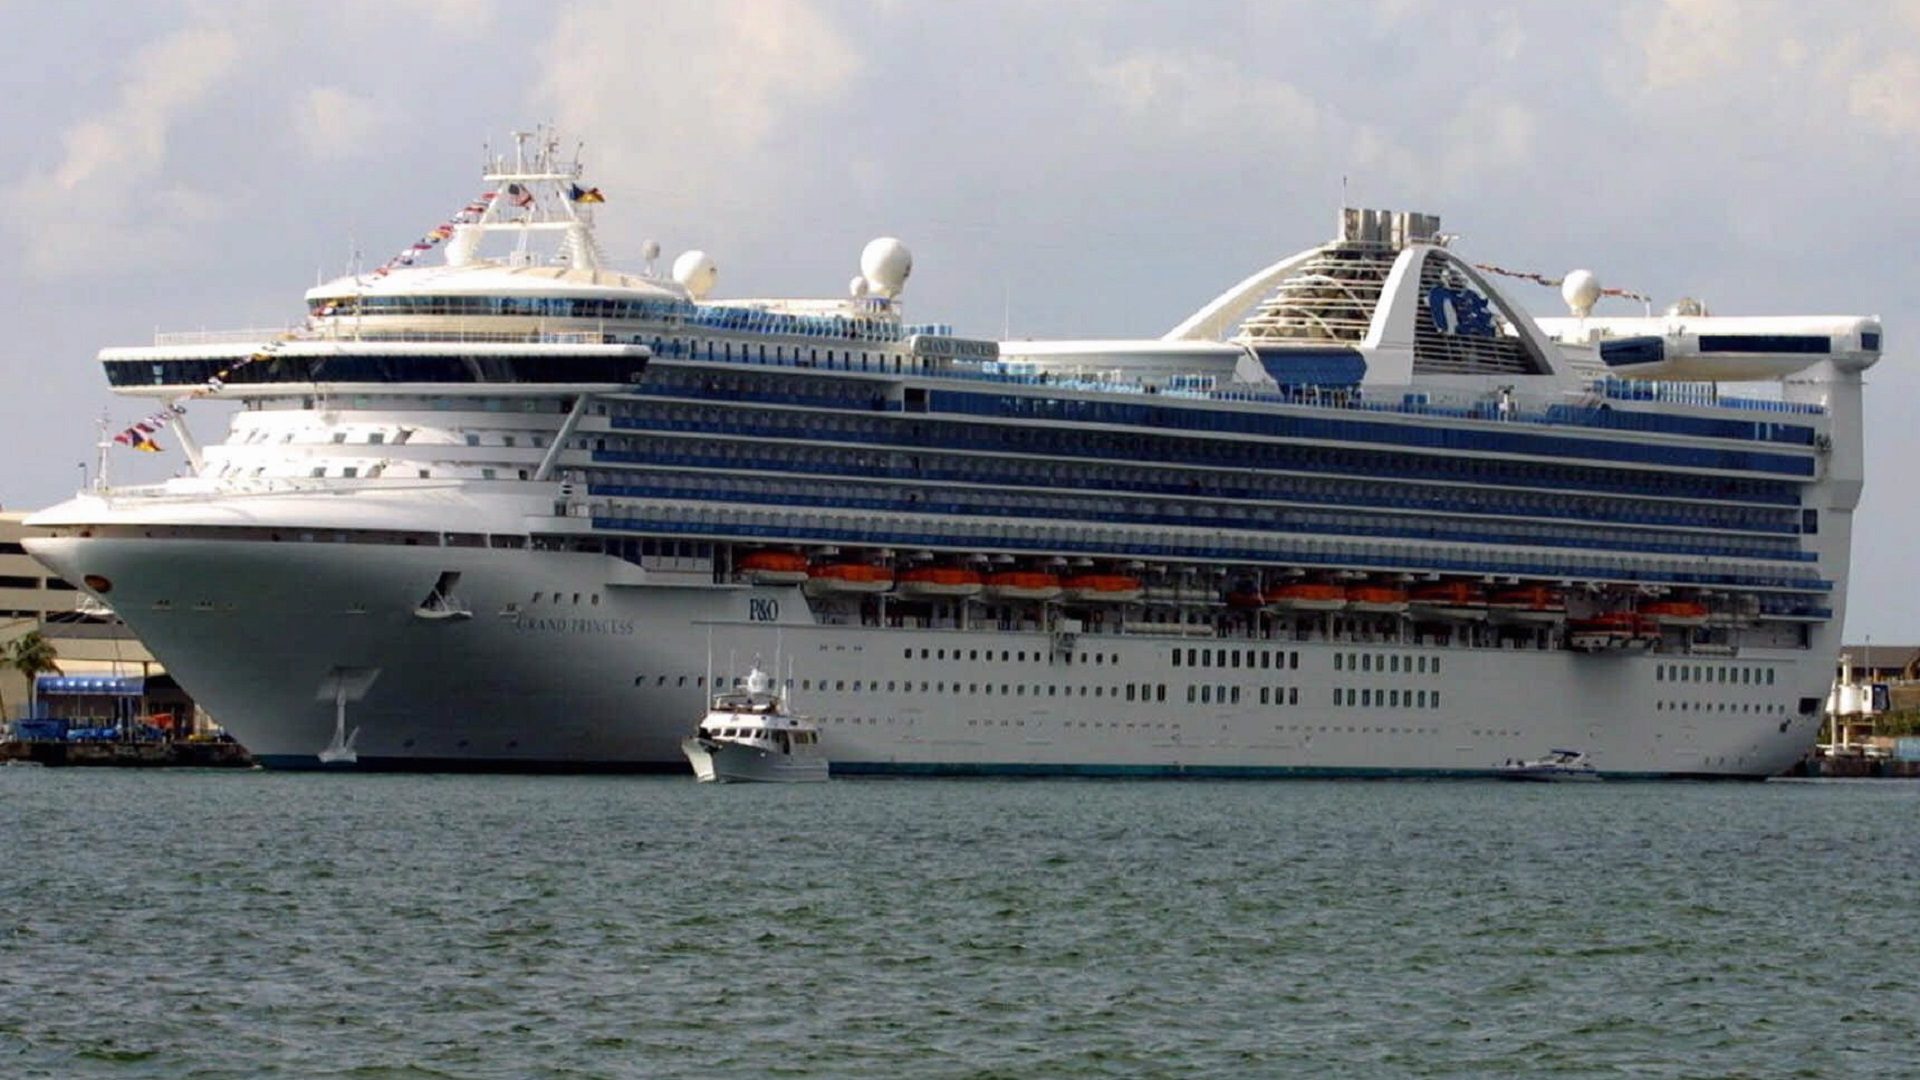 At least 100 people aboard the Grand Princess cruise ship will be tested for the coronavirus that causes COVID-19, after a former passenger died from the disease this week. The ship is seen here in a photo from 2001.